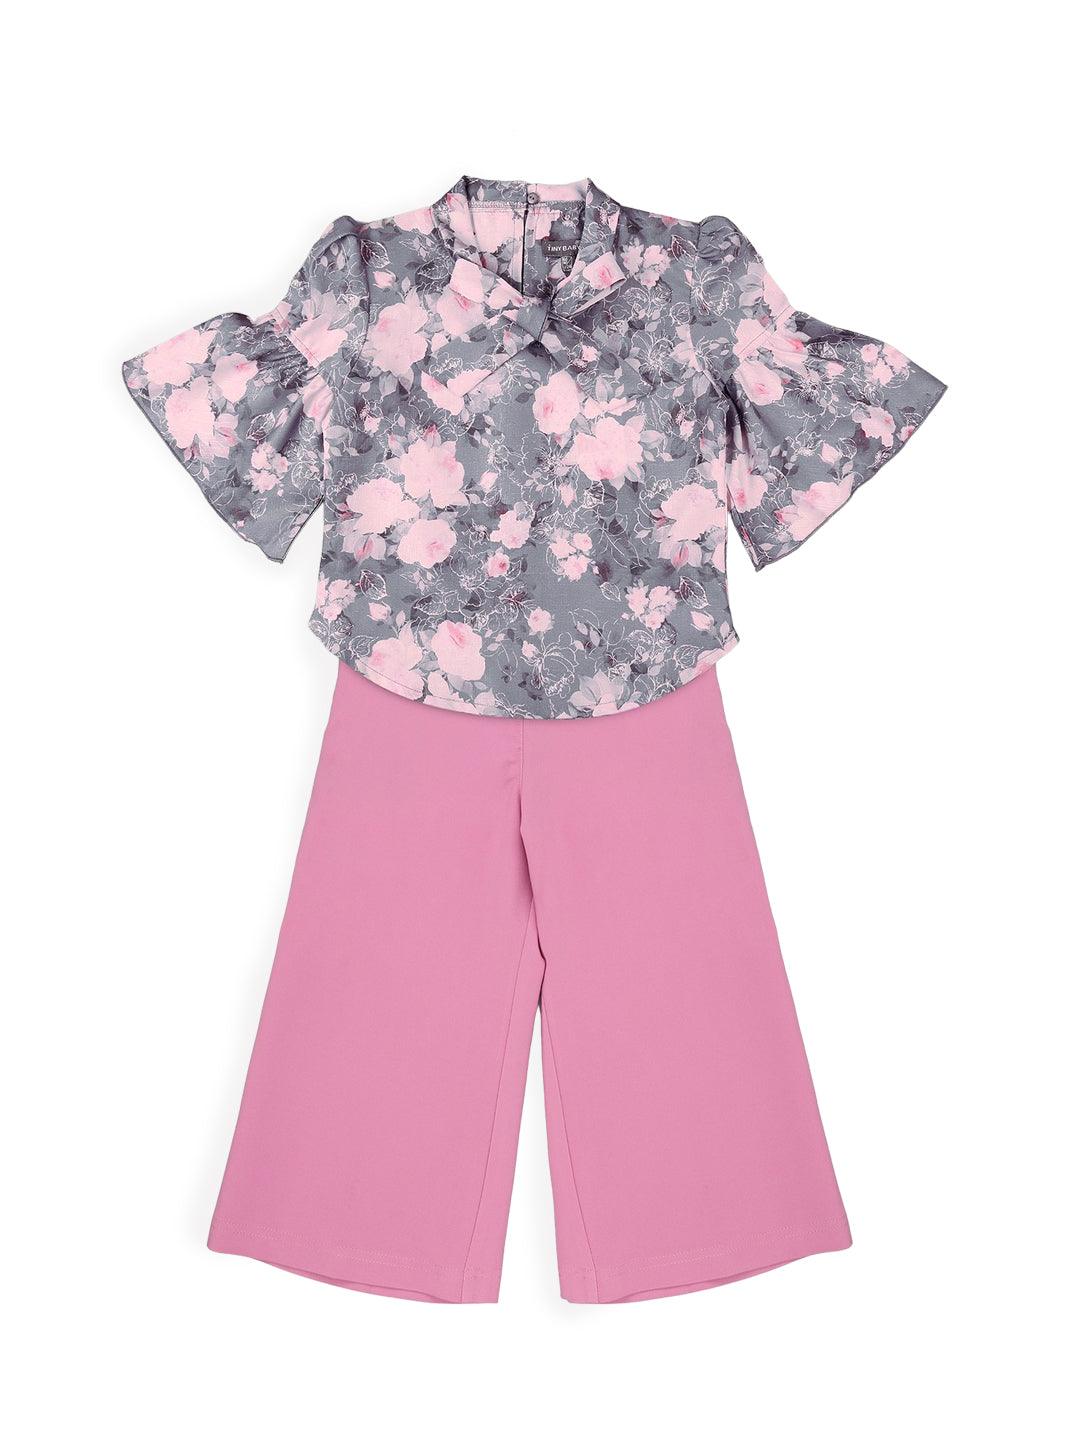 Tiny Baby Rose Pink Culottes 1974-Peach - TINY BABY INDIA shop.tinybaby.in